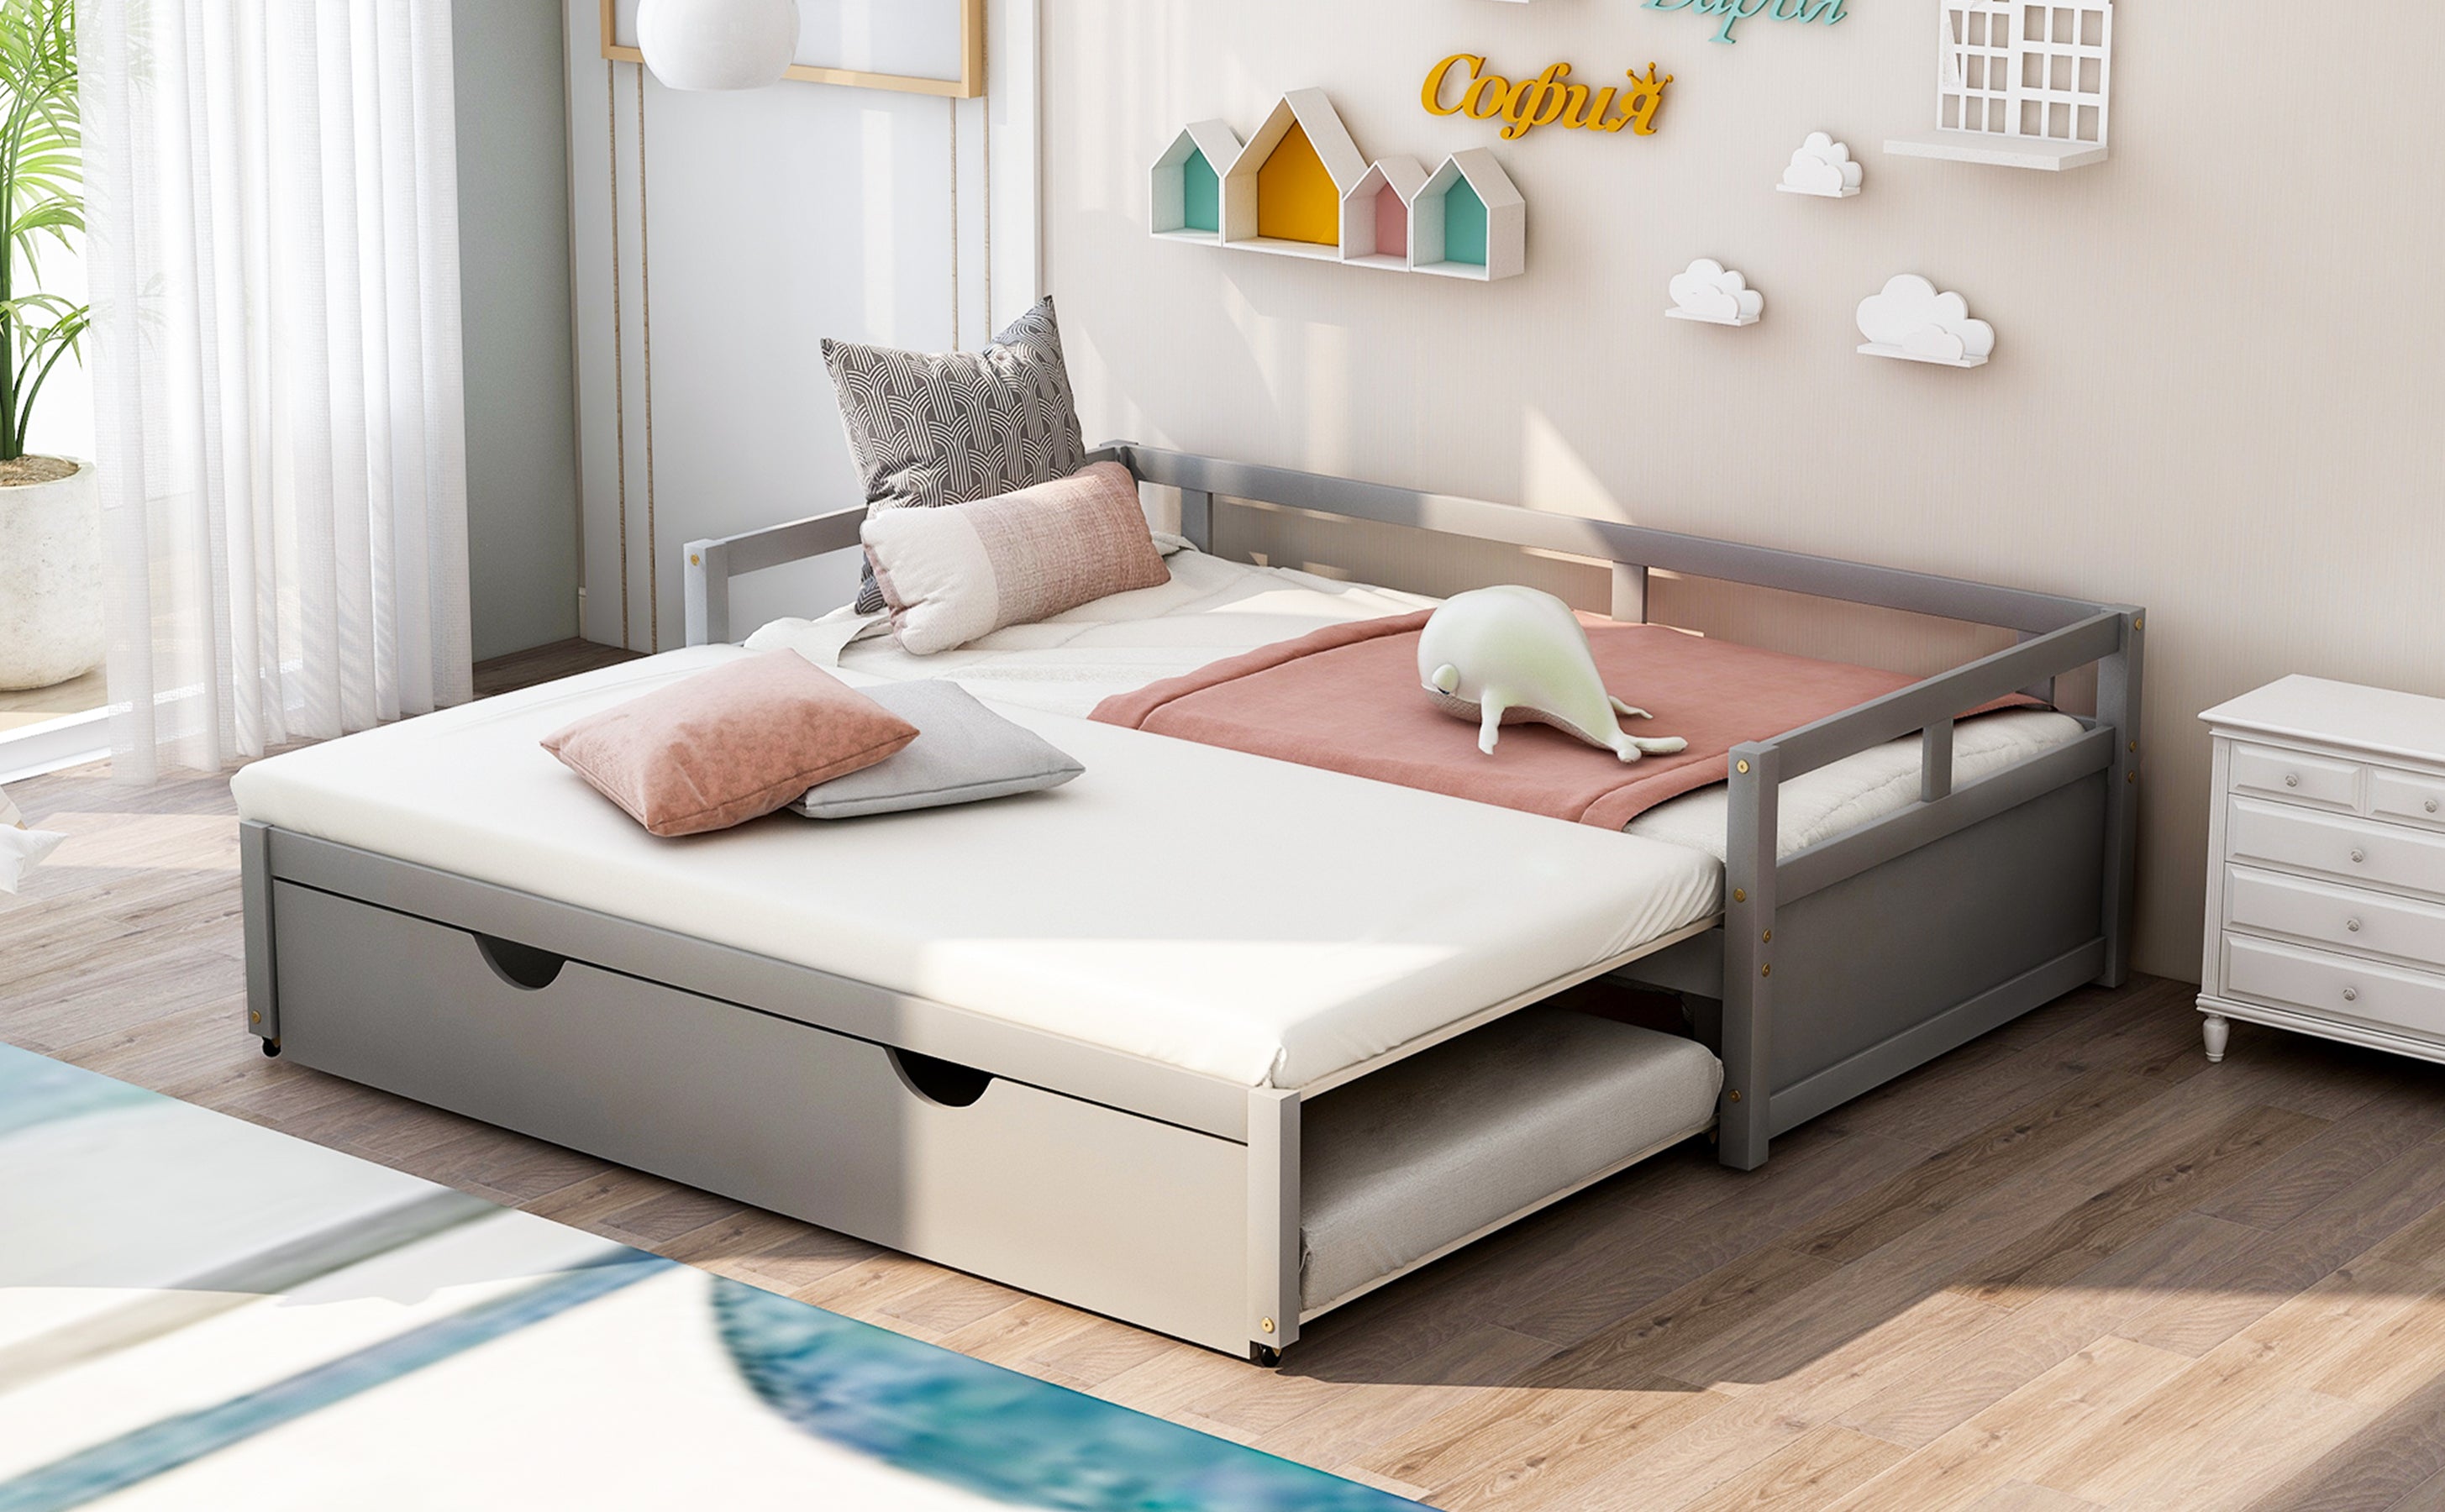 Extending Daybed with Trundle (Gray)